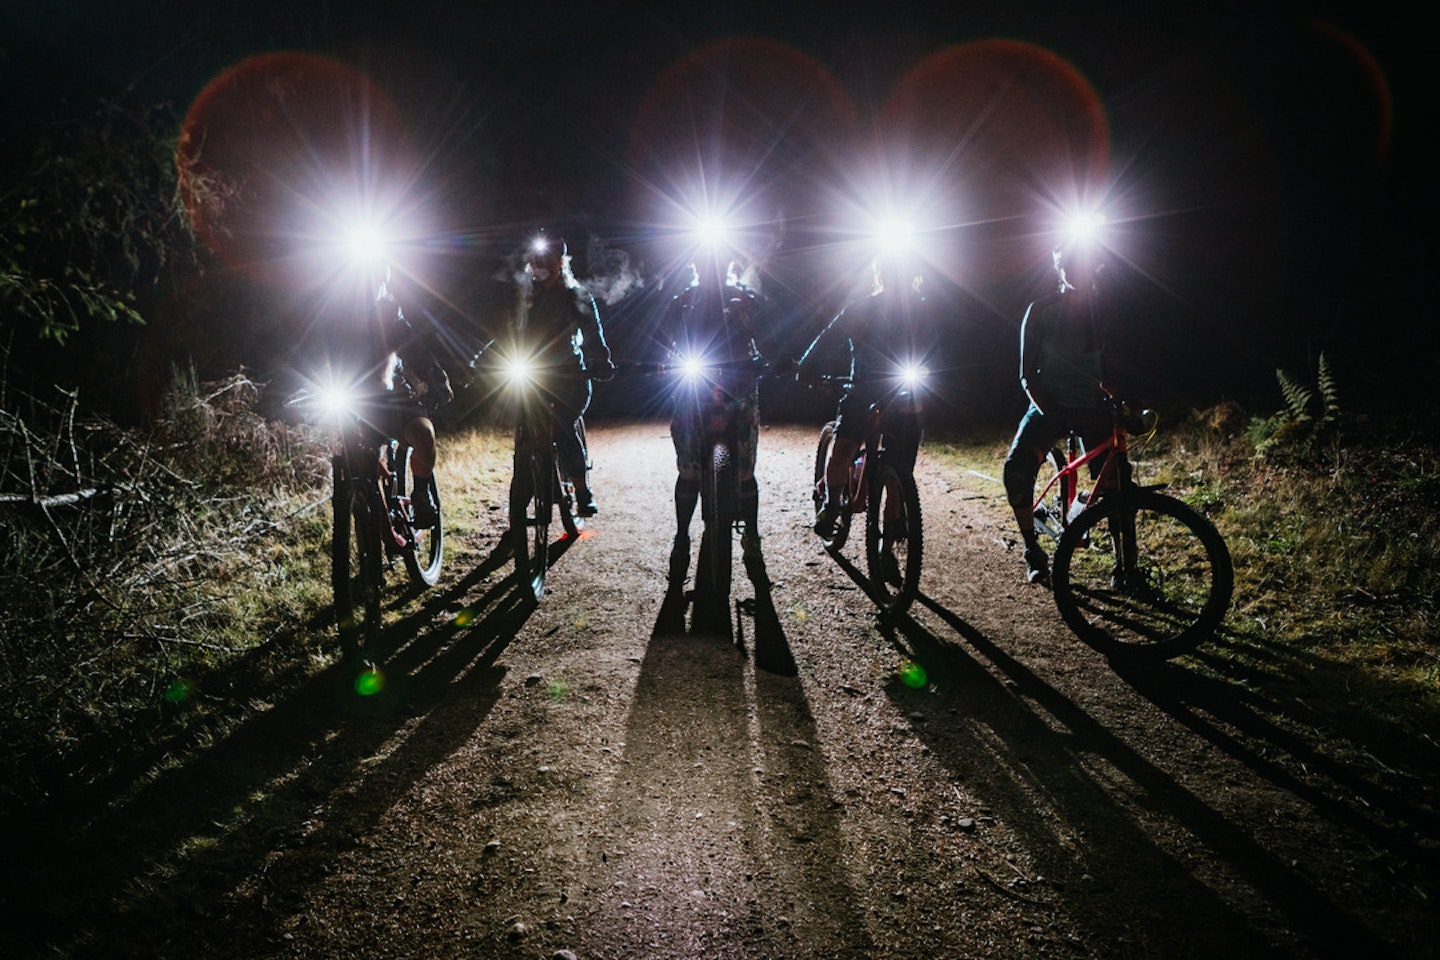 Bike riders with front bike lights on in the dark